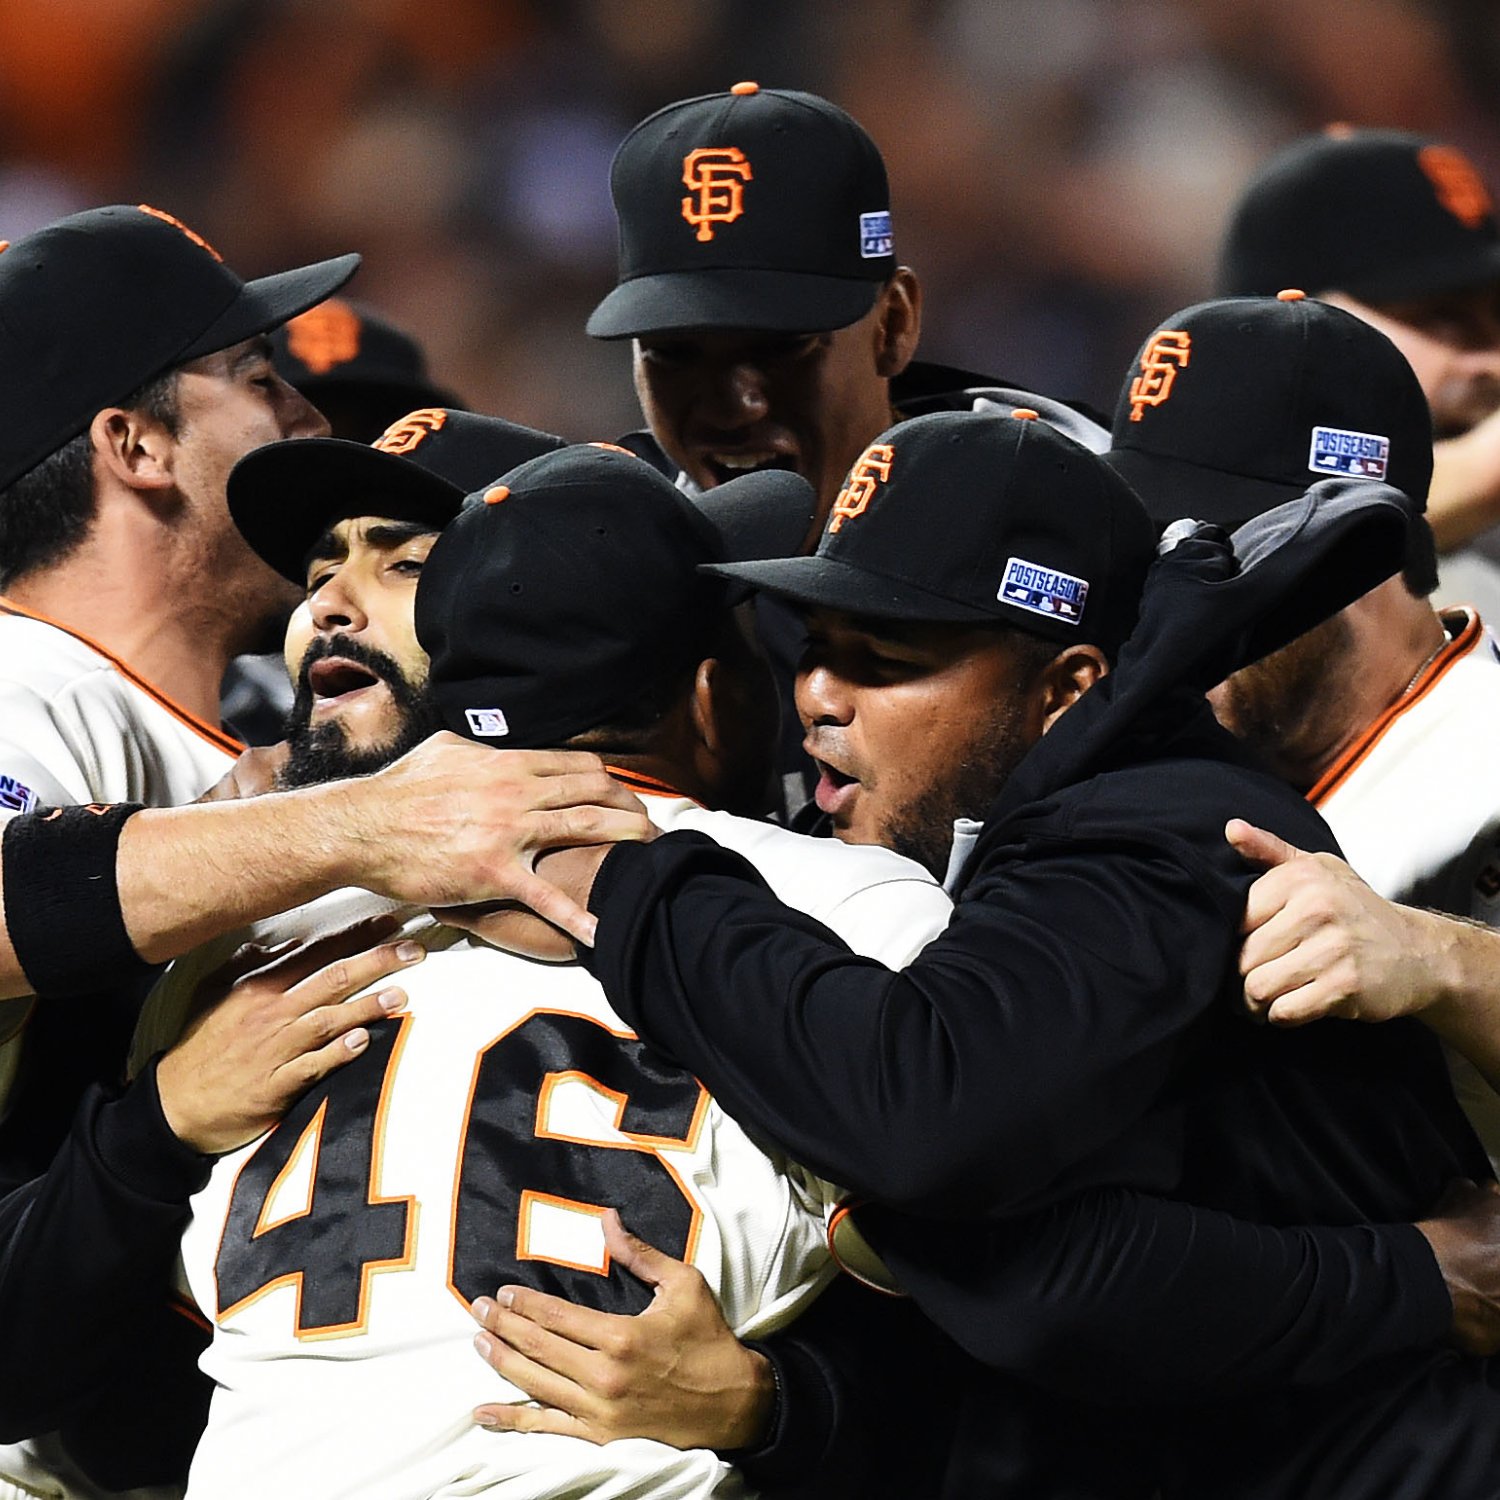 NLCS Schedule 2014: Giants vs. Cardinals Series Coverage Info and Predictions | Bleacher Report